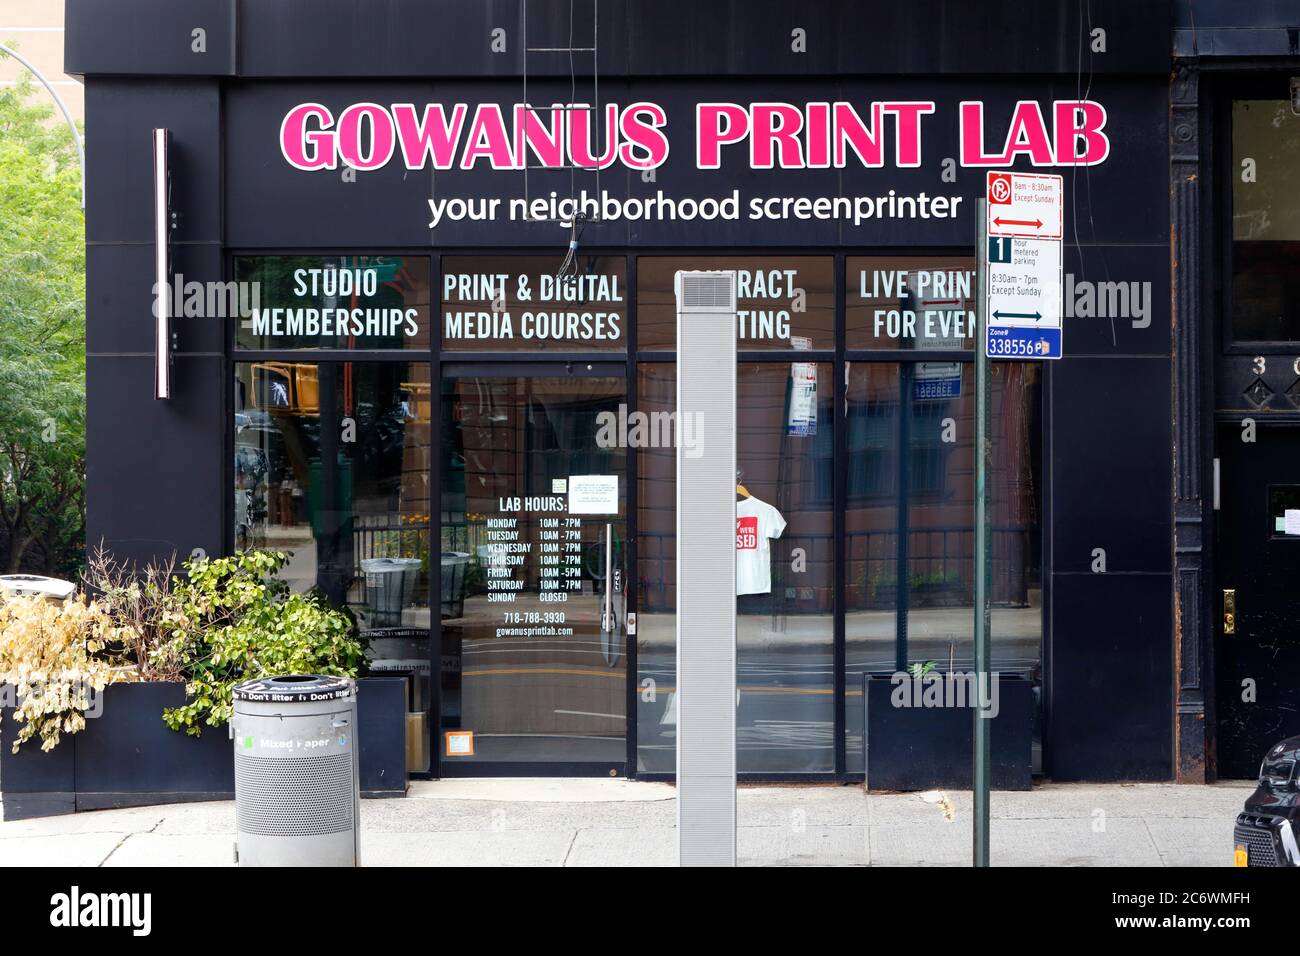 [historical storefront] Gowanus Print Lab, 304 5th Ave, Brooklyn, NYC storefront photo of a screenprinting shop in Park Slope Stock Photo